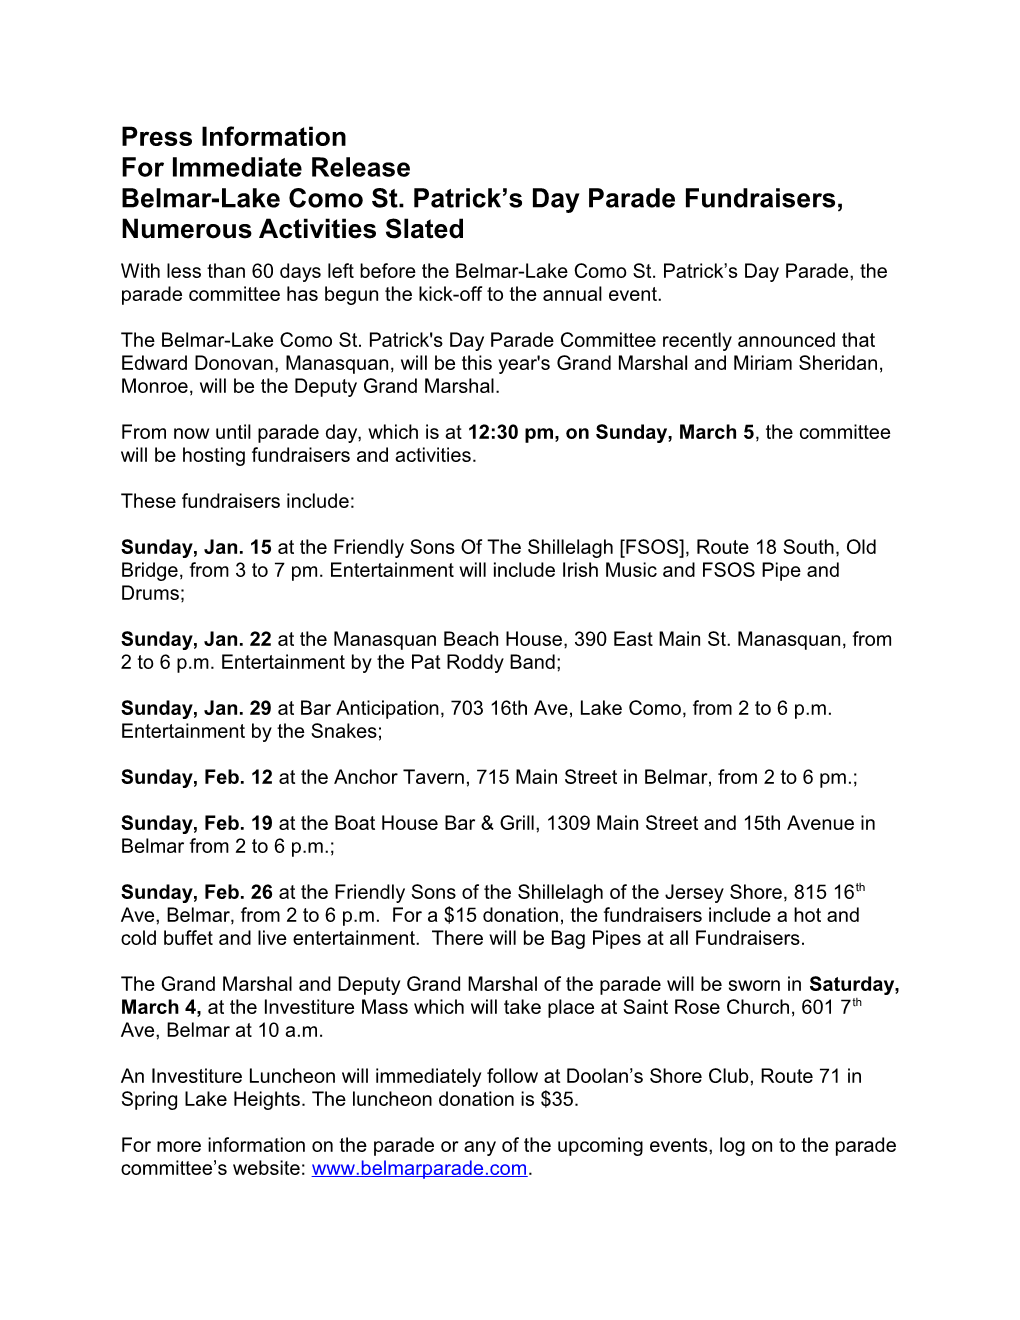 Belmar-Lake Como St. Patrick S Day Parade Fundraisers, Numerous Activities Slated